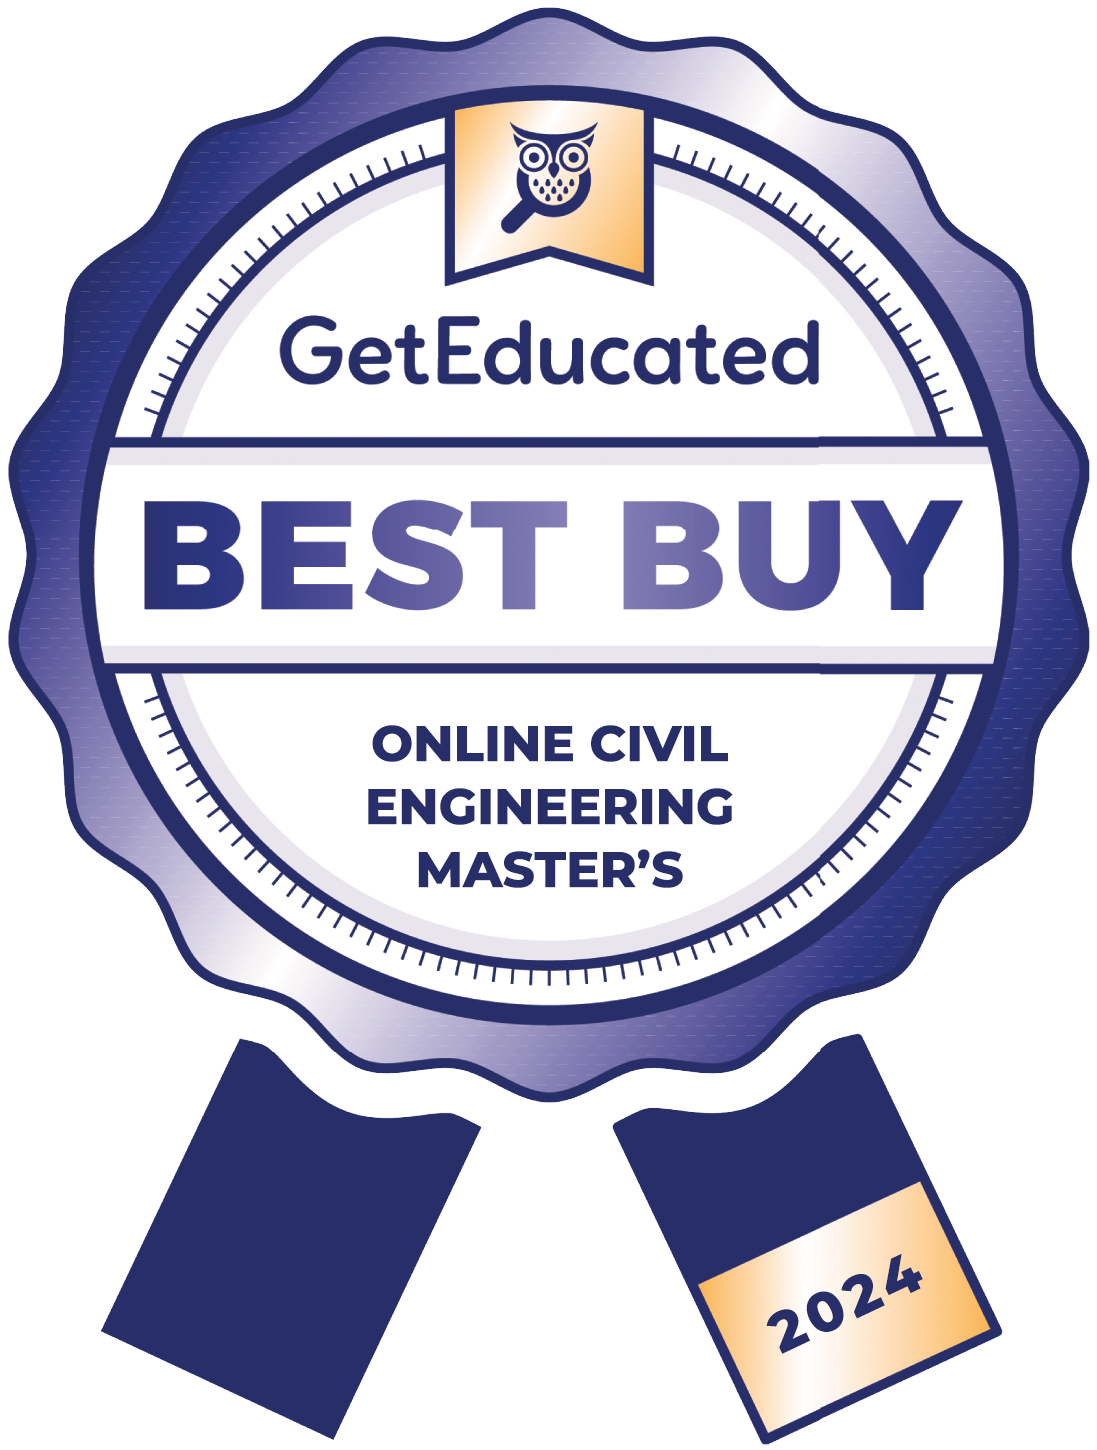 Rankings for the cheapest online civil engineering master's